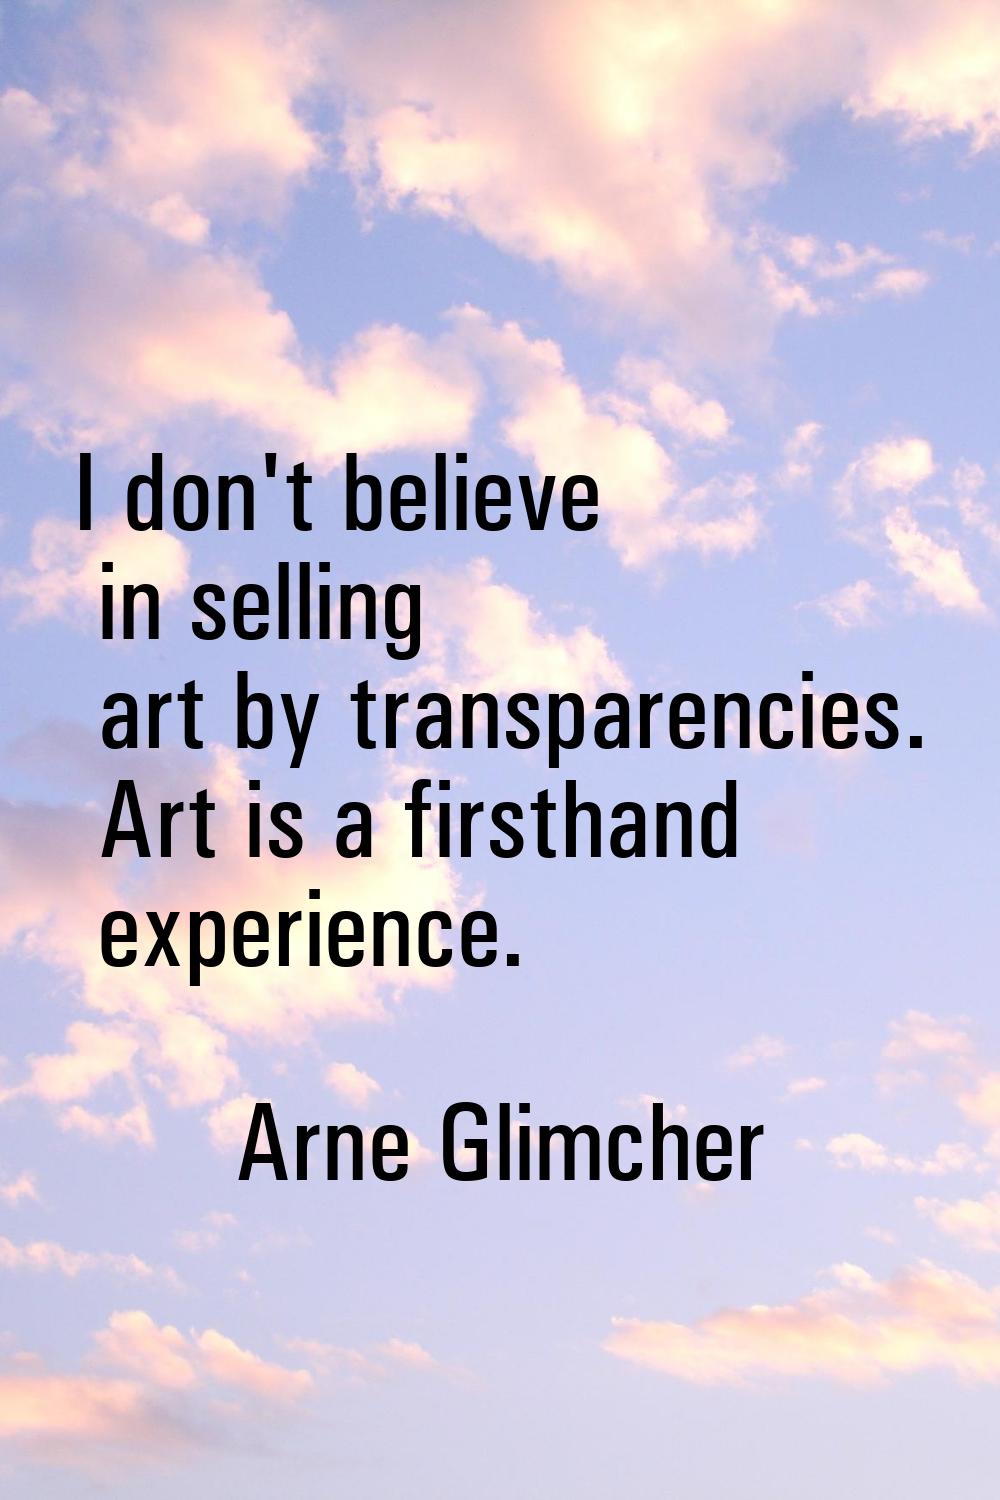 I don't believe in selling art by transparencies. Art is a firsthand experience.